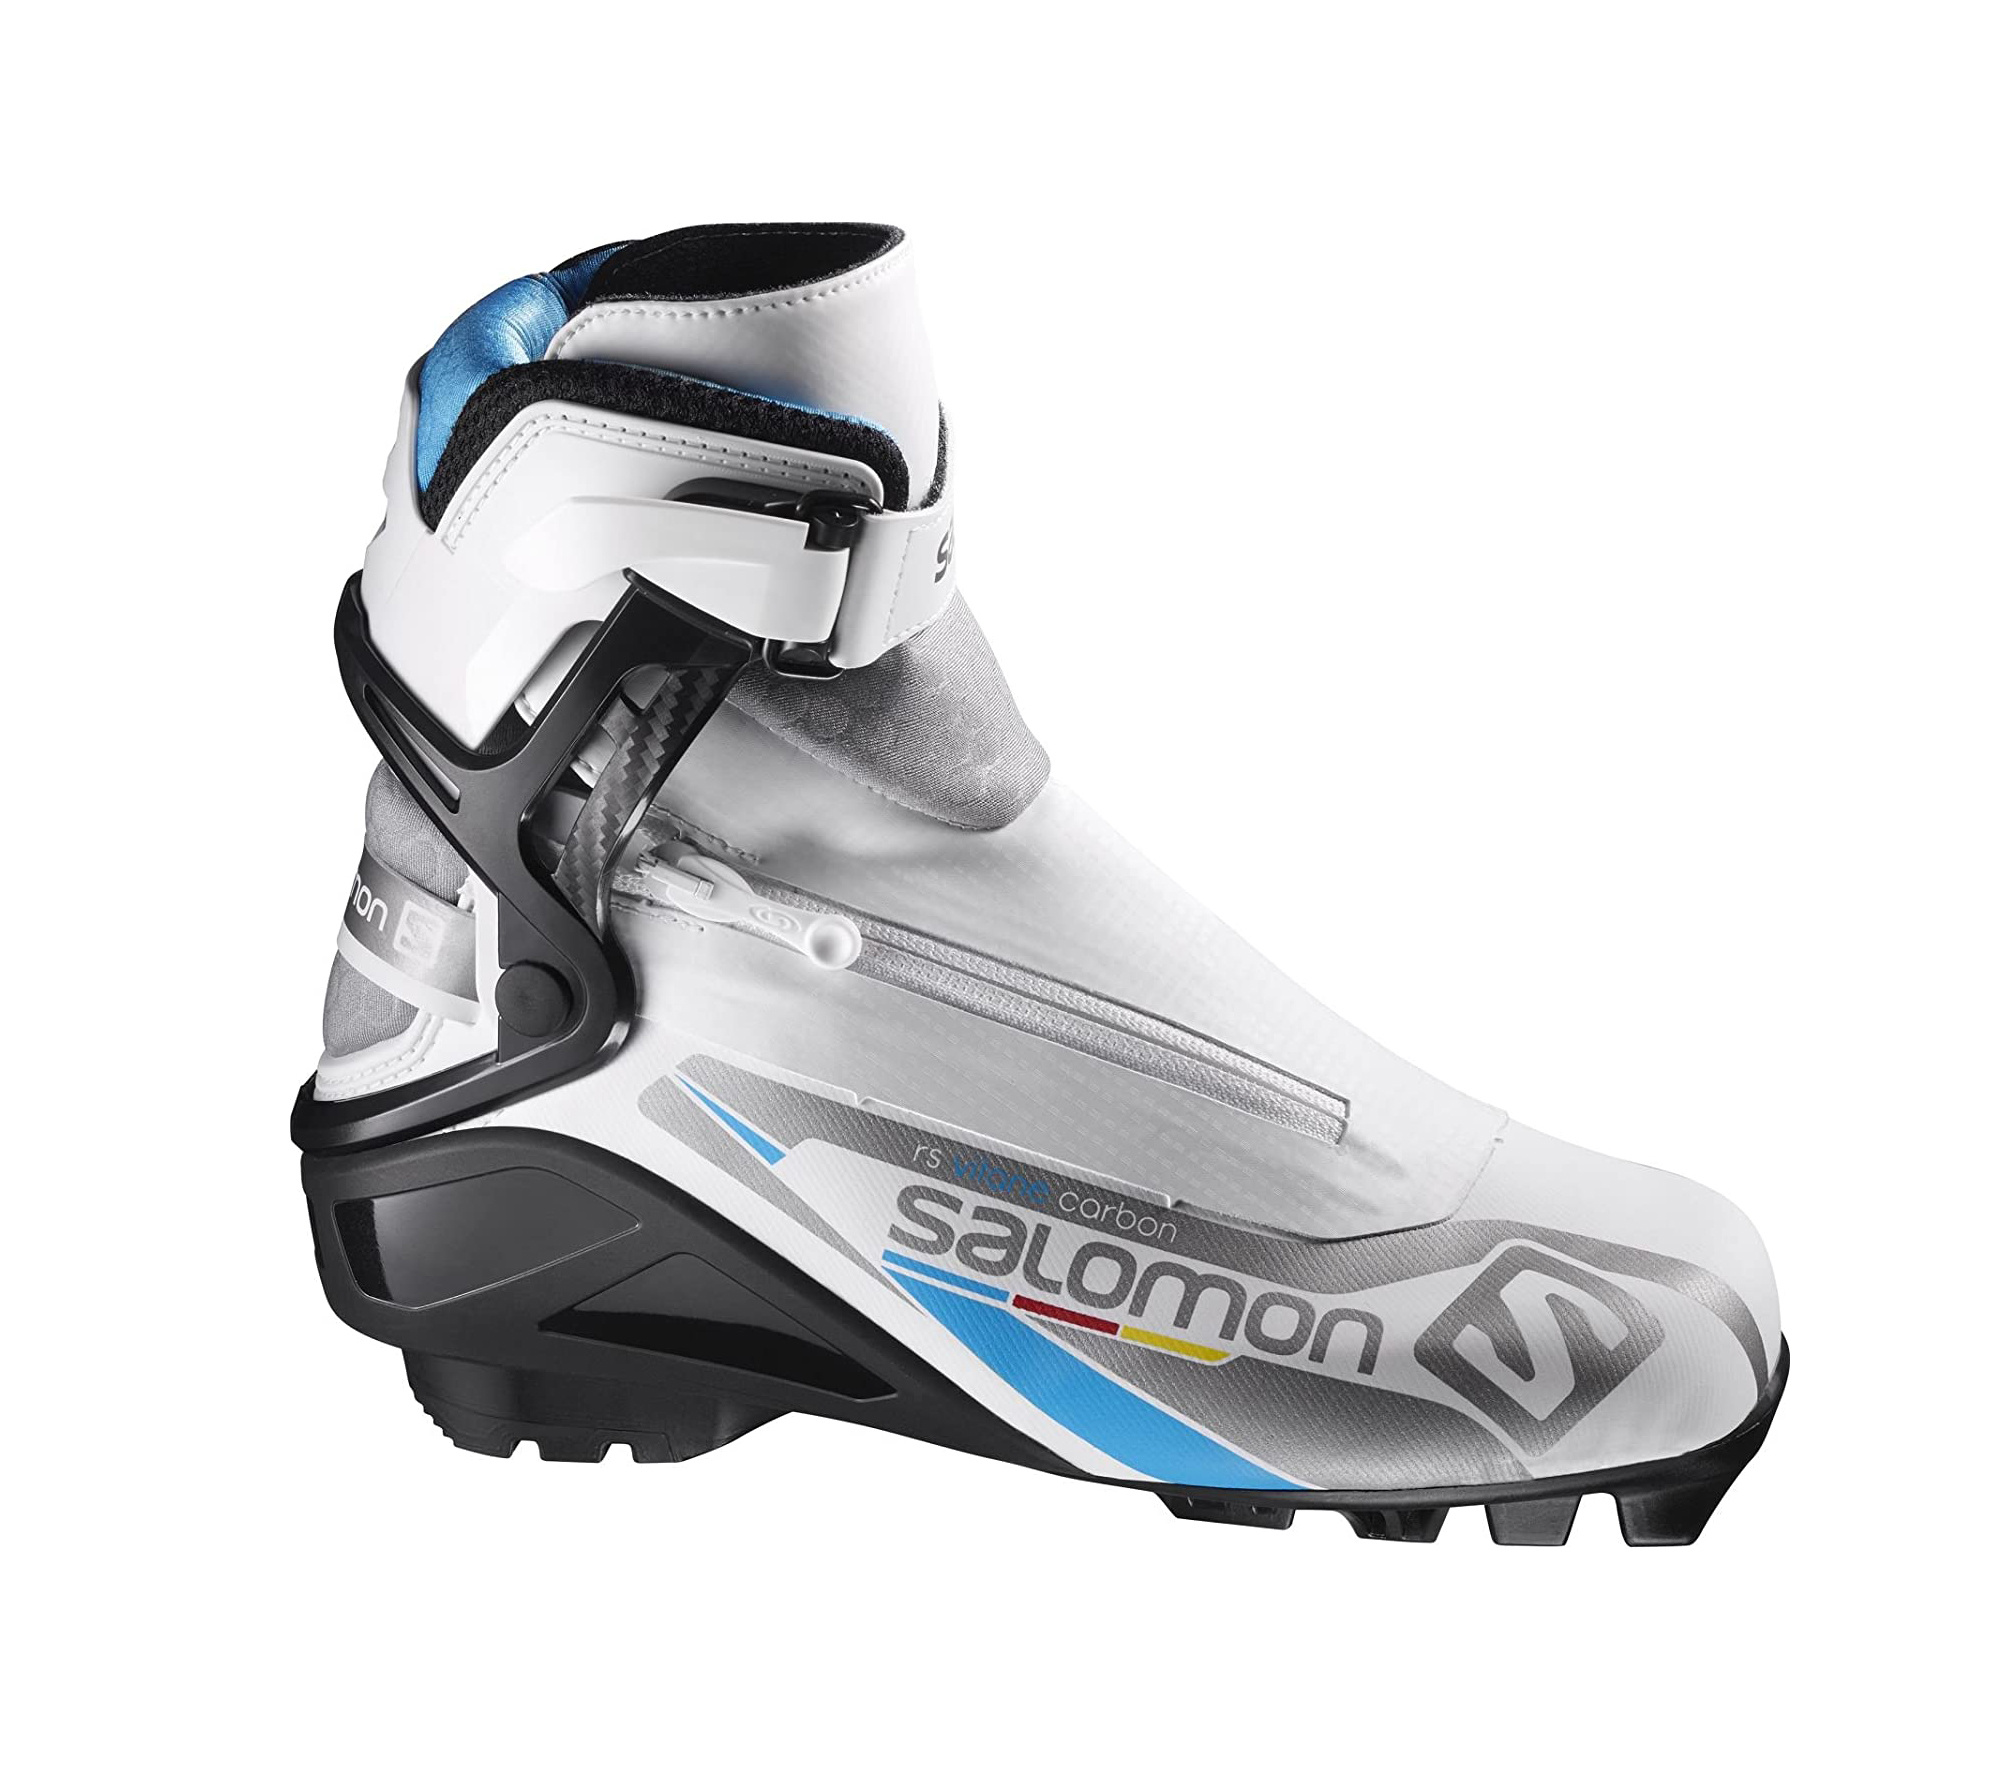 Salomon RS Vitane Carbon Pilot Boot 17/18 - and Kroes Cycle